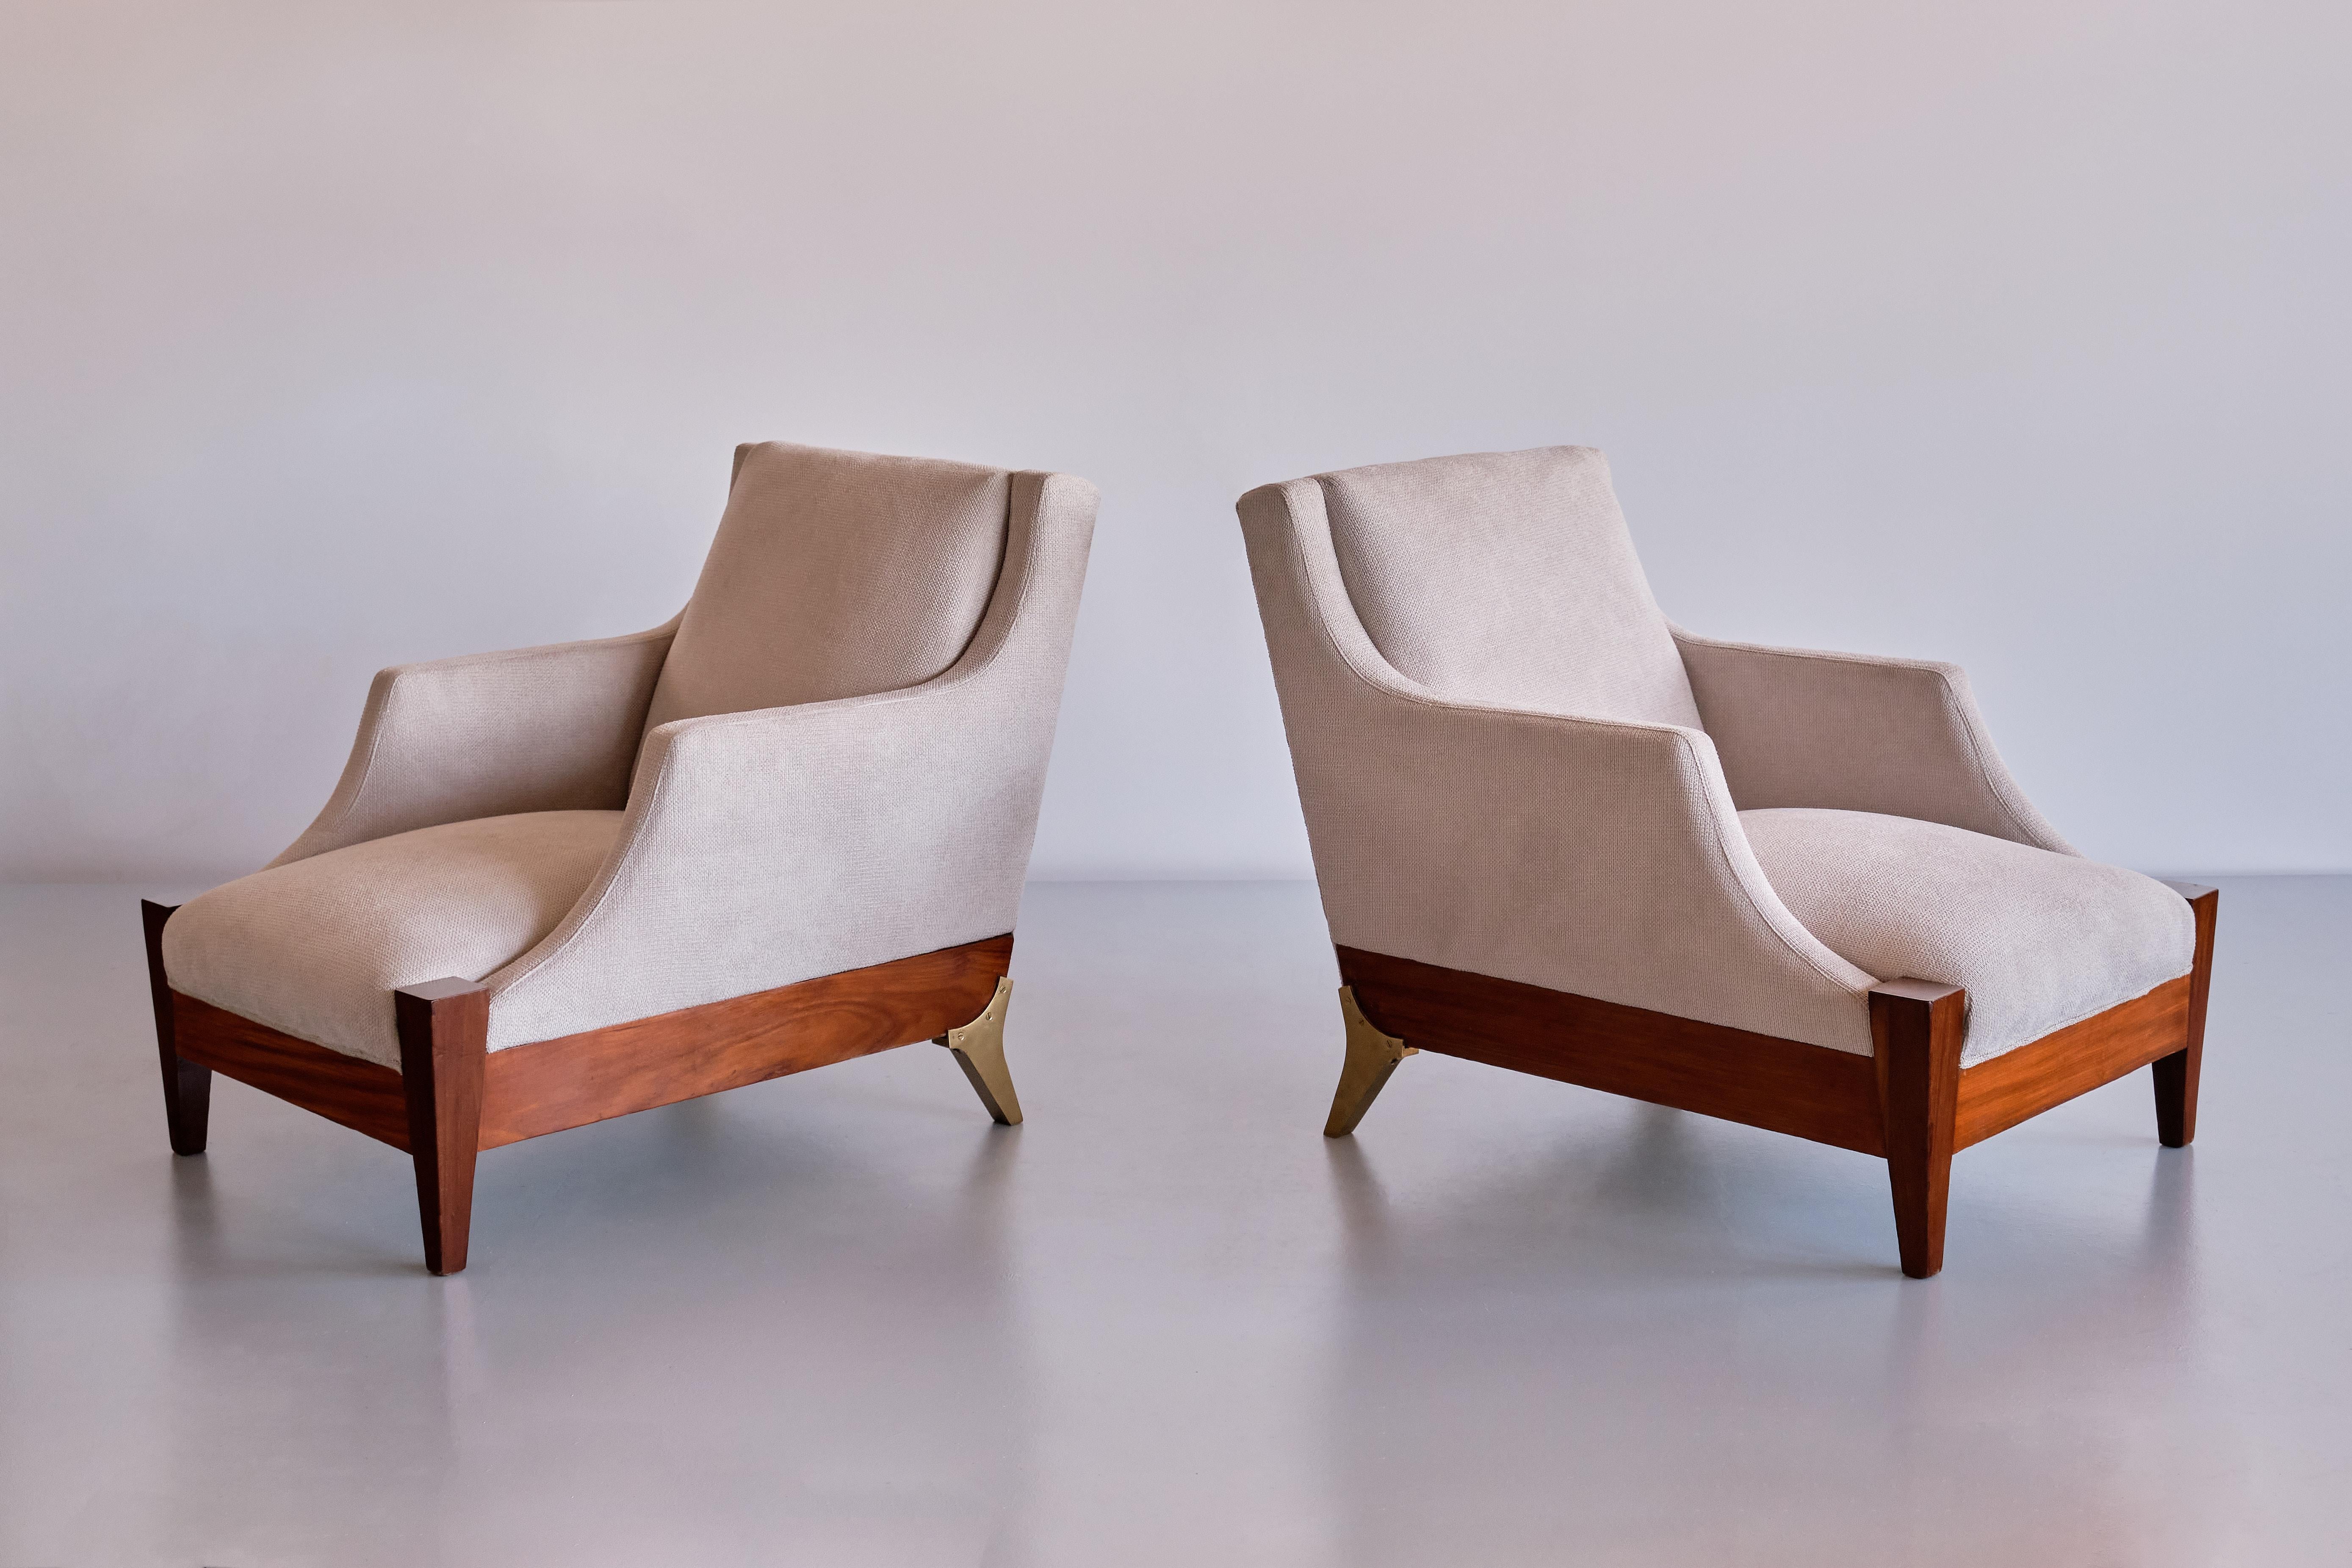 This exceptionally rare pair of armchairs was designed by Melchiorre Bega and produced in Italy in the late 1940s. The design is marked by the elegant, elongated frame and the curved lines of the armrest. The lower frame is in solid walnut wood with